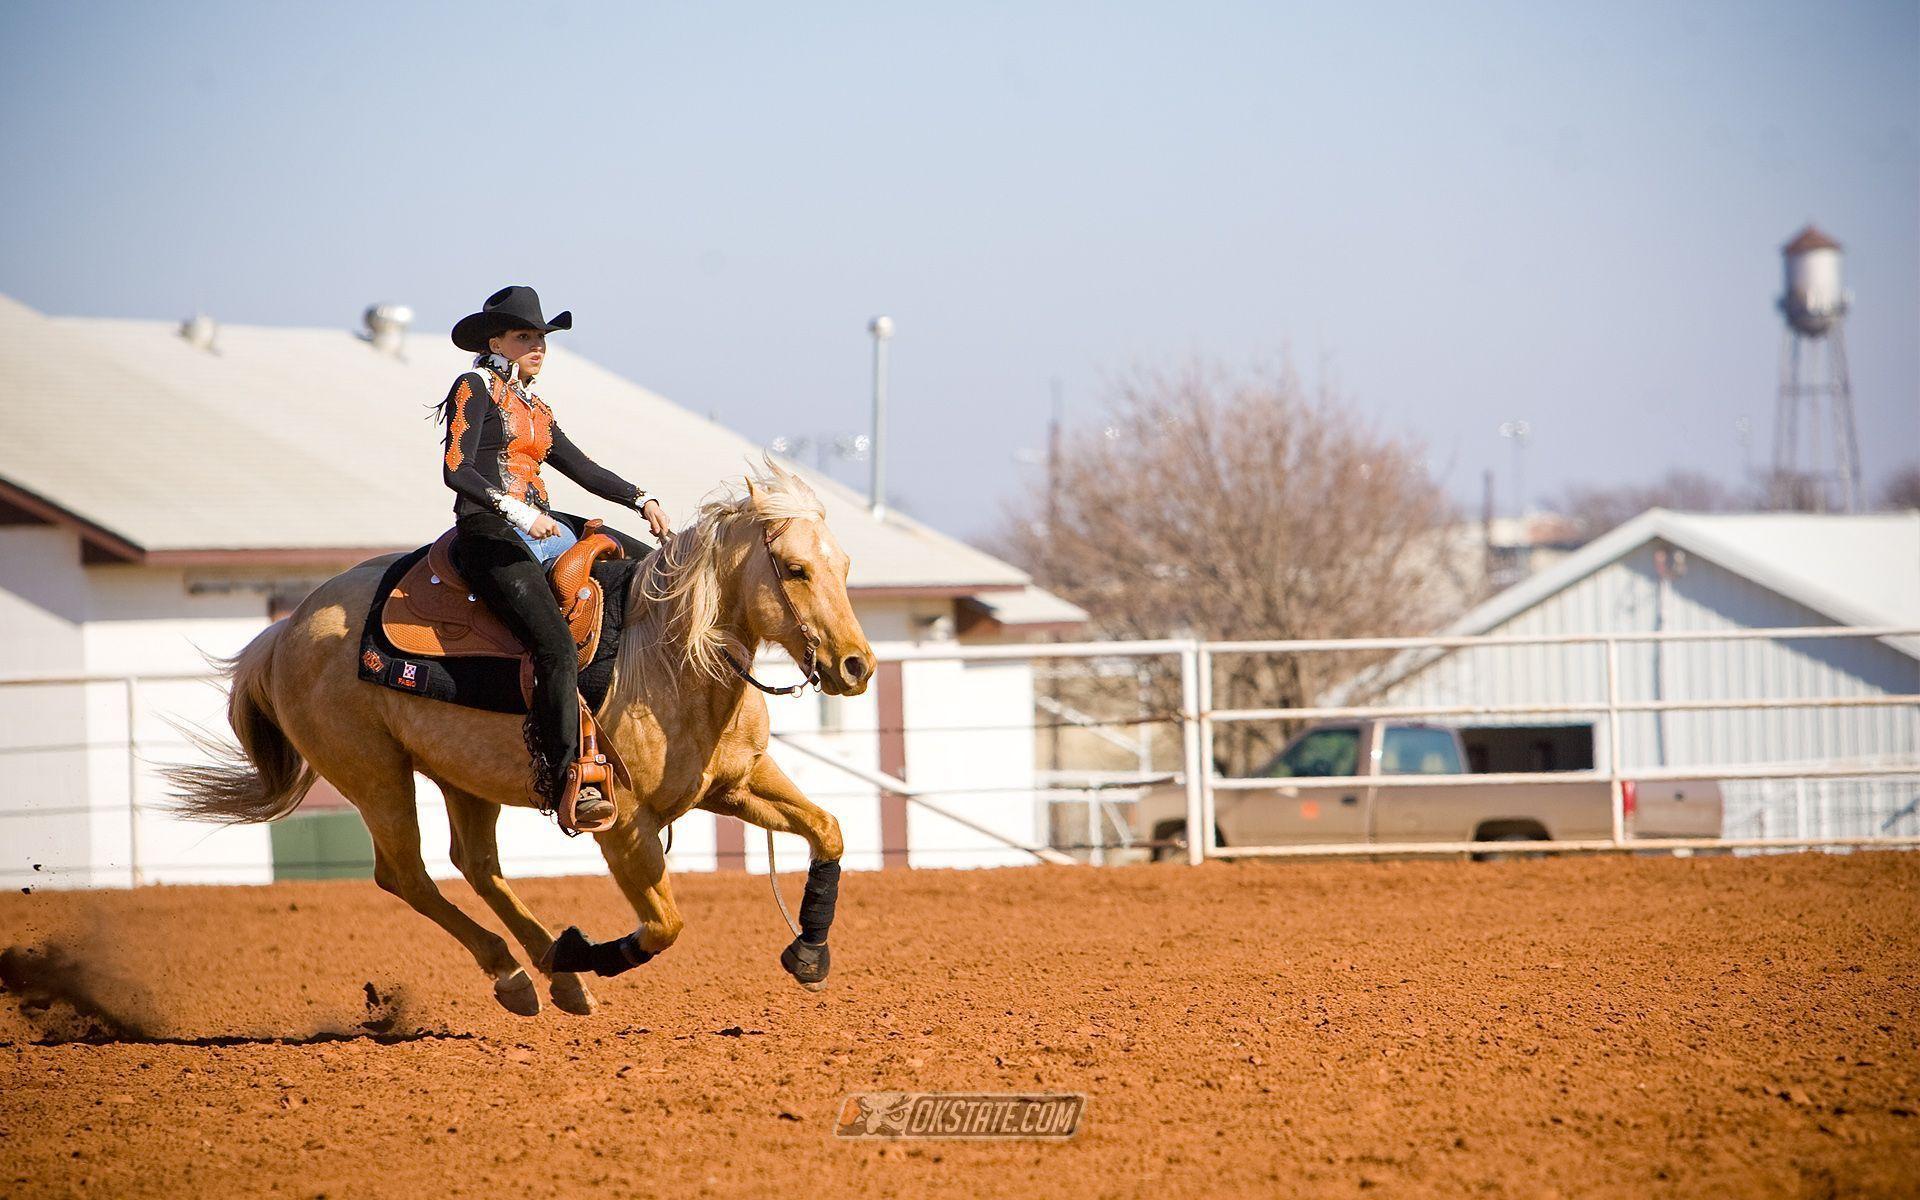 Oklahoma State Official Athletic Site&;s Equestrian